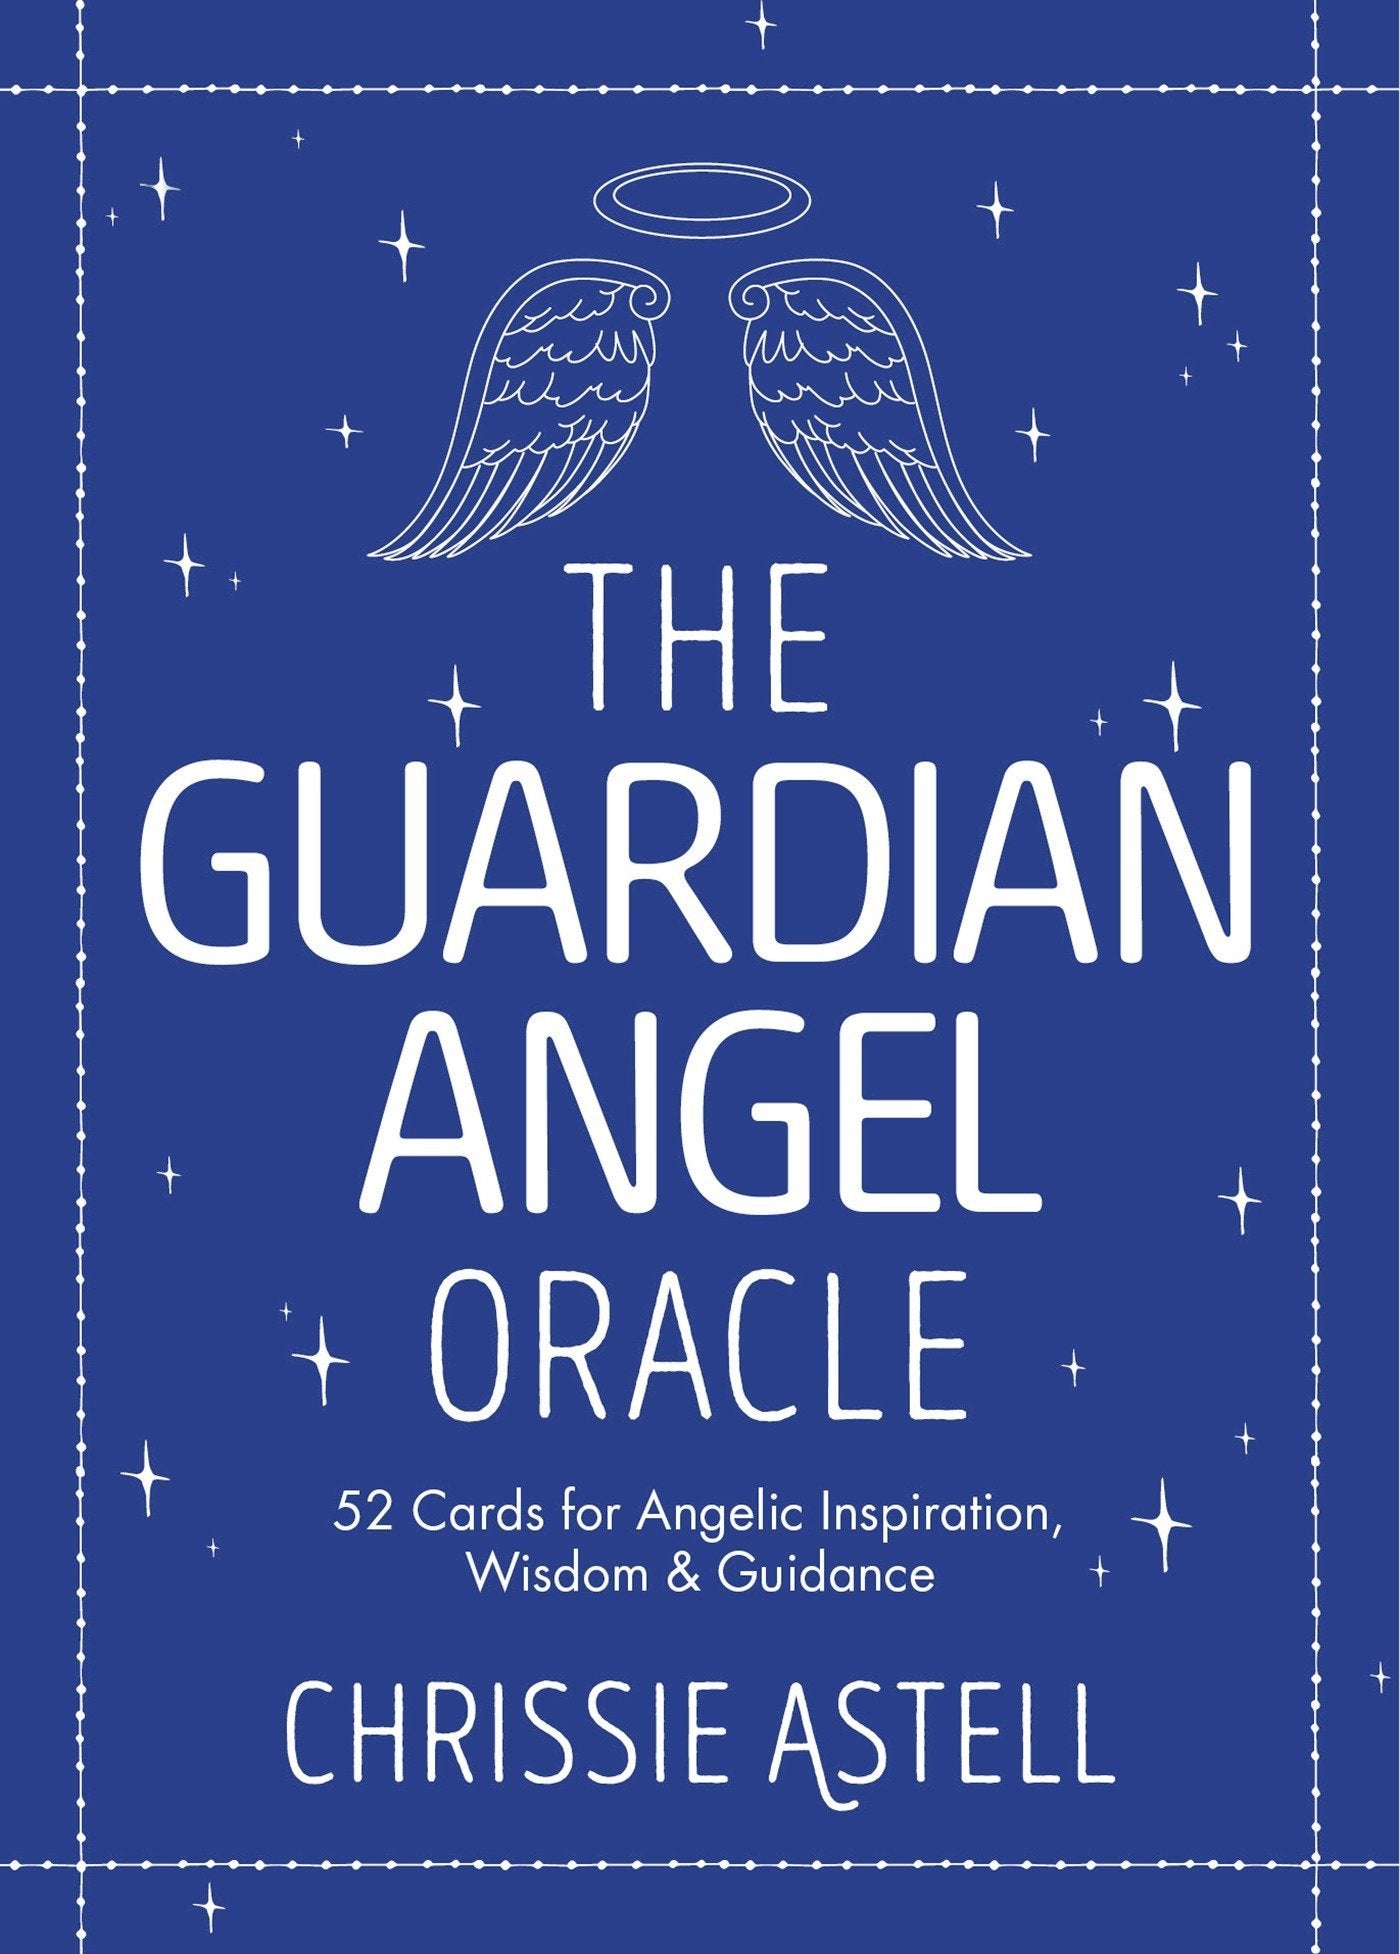 The Guardian Angel Oracle Cards & Guidebook || Chrissie Astell